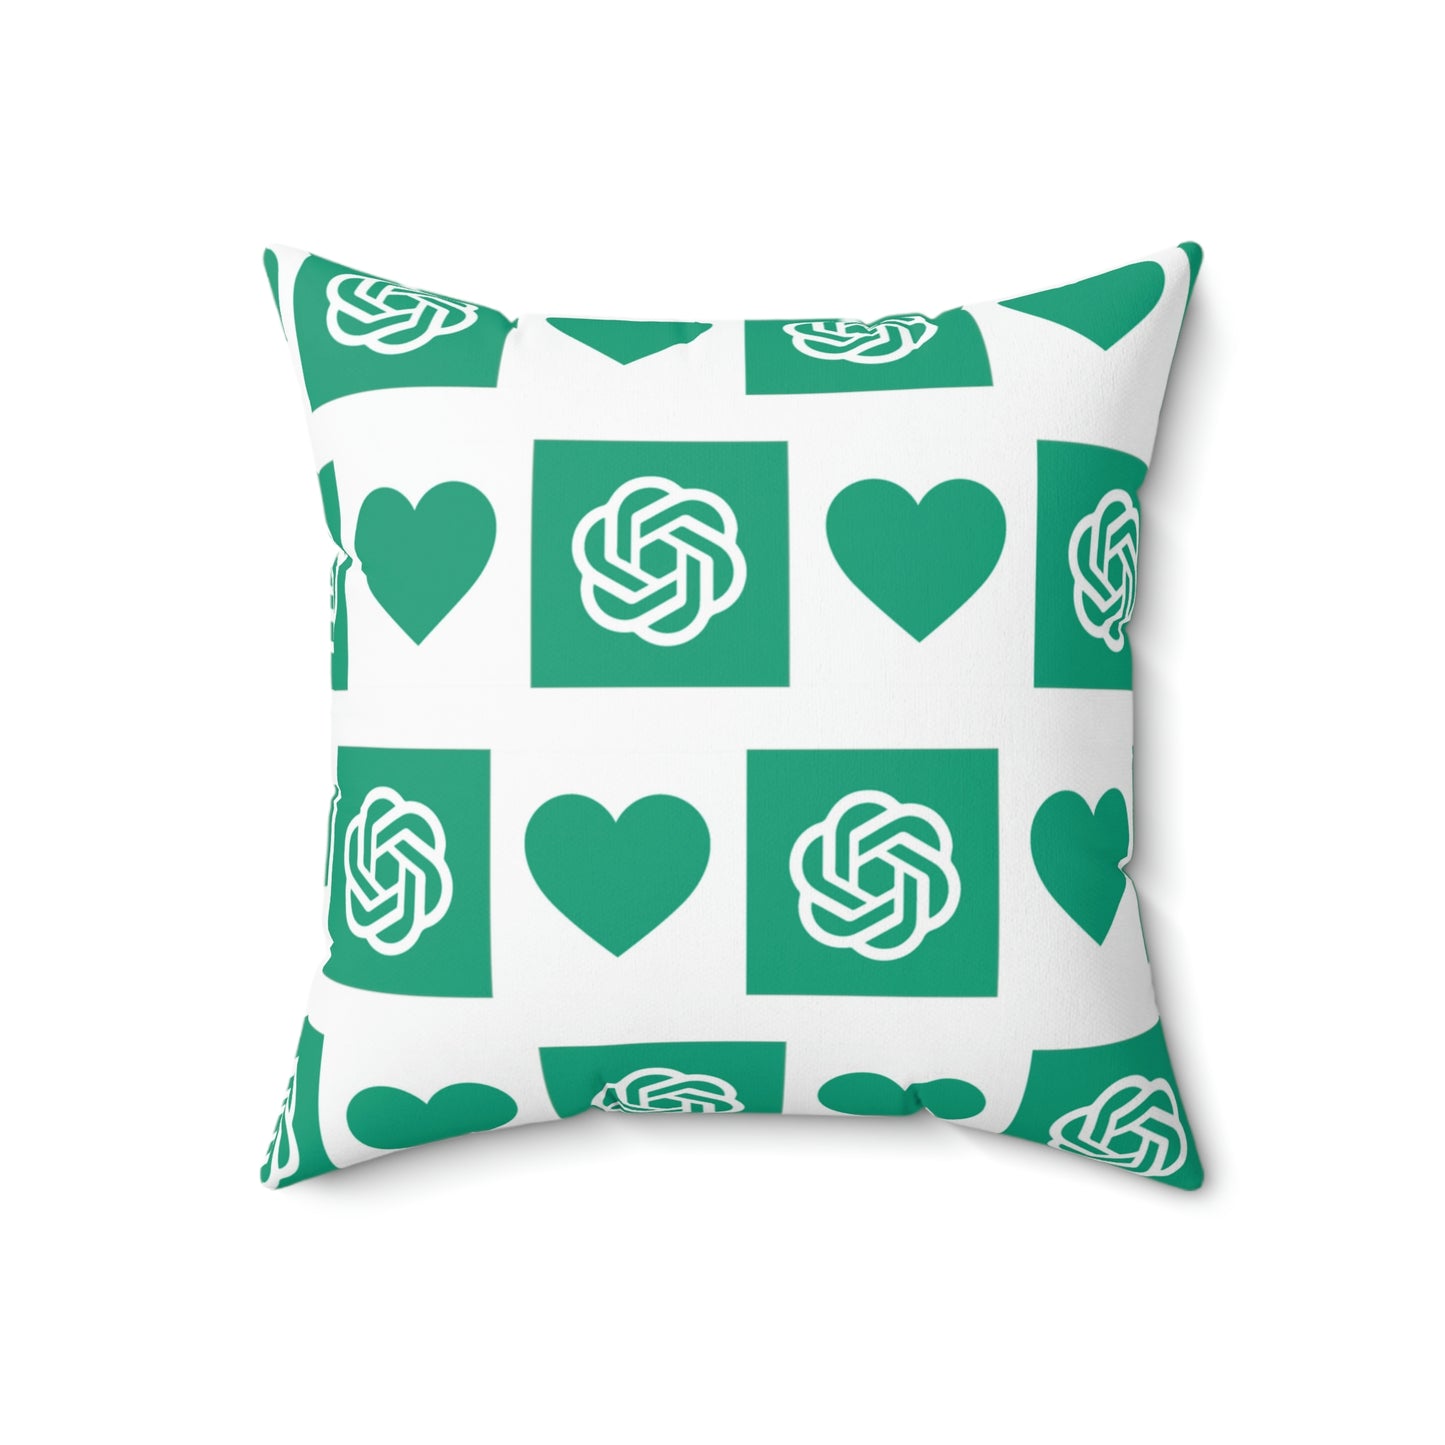 ChatGPT love pillow - Valentine's Collection